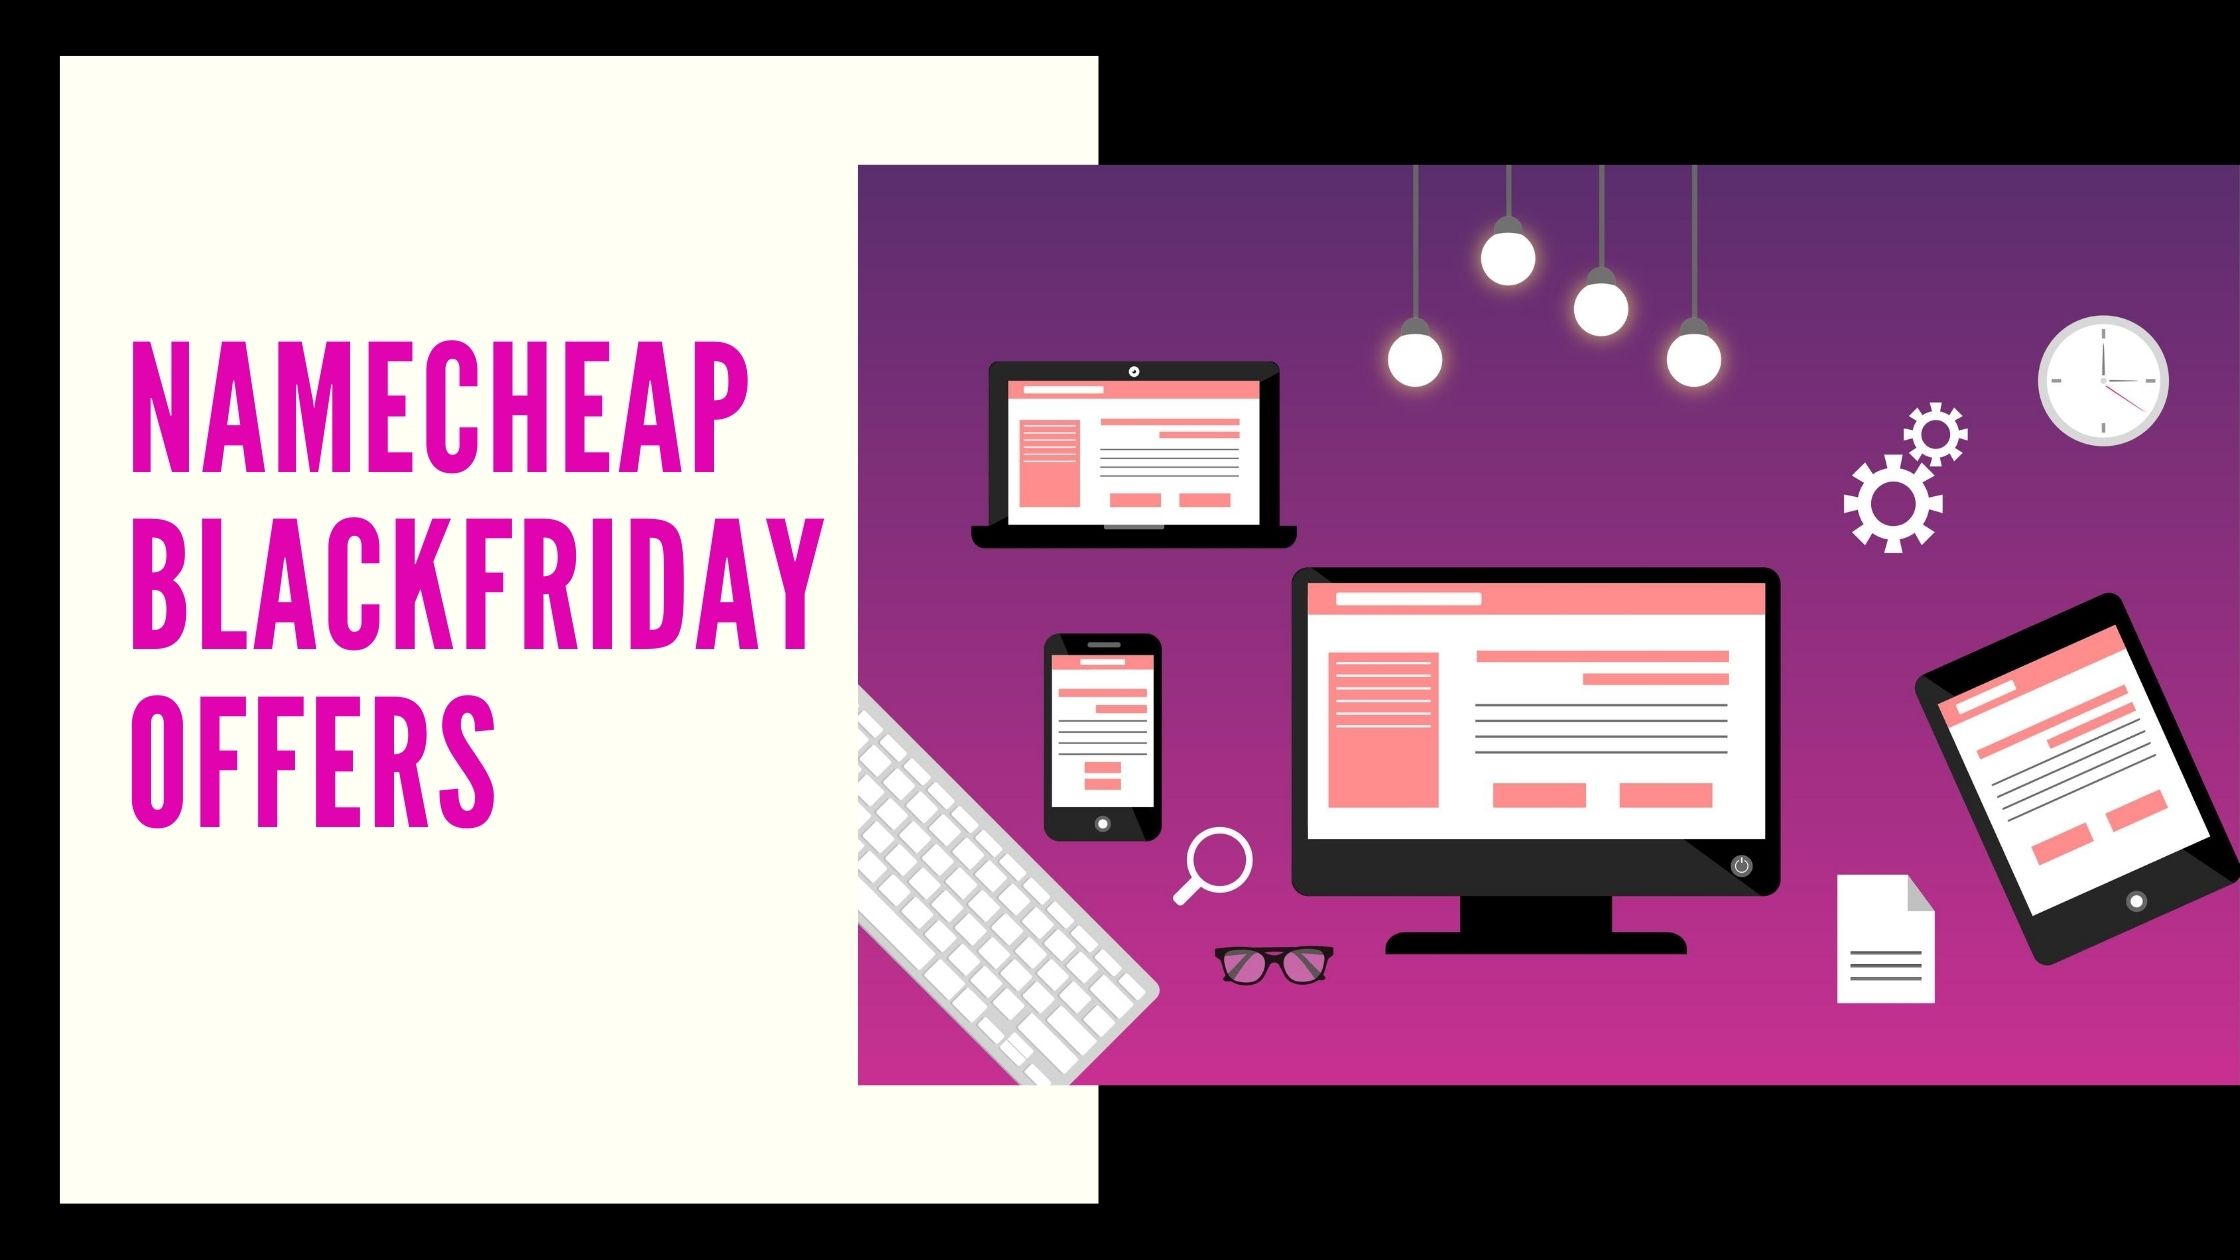 Blackfriday and cyber monday offers by Namecheap this year, Namecheap Black friday Deal